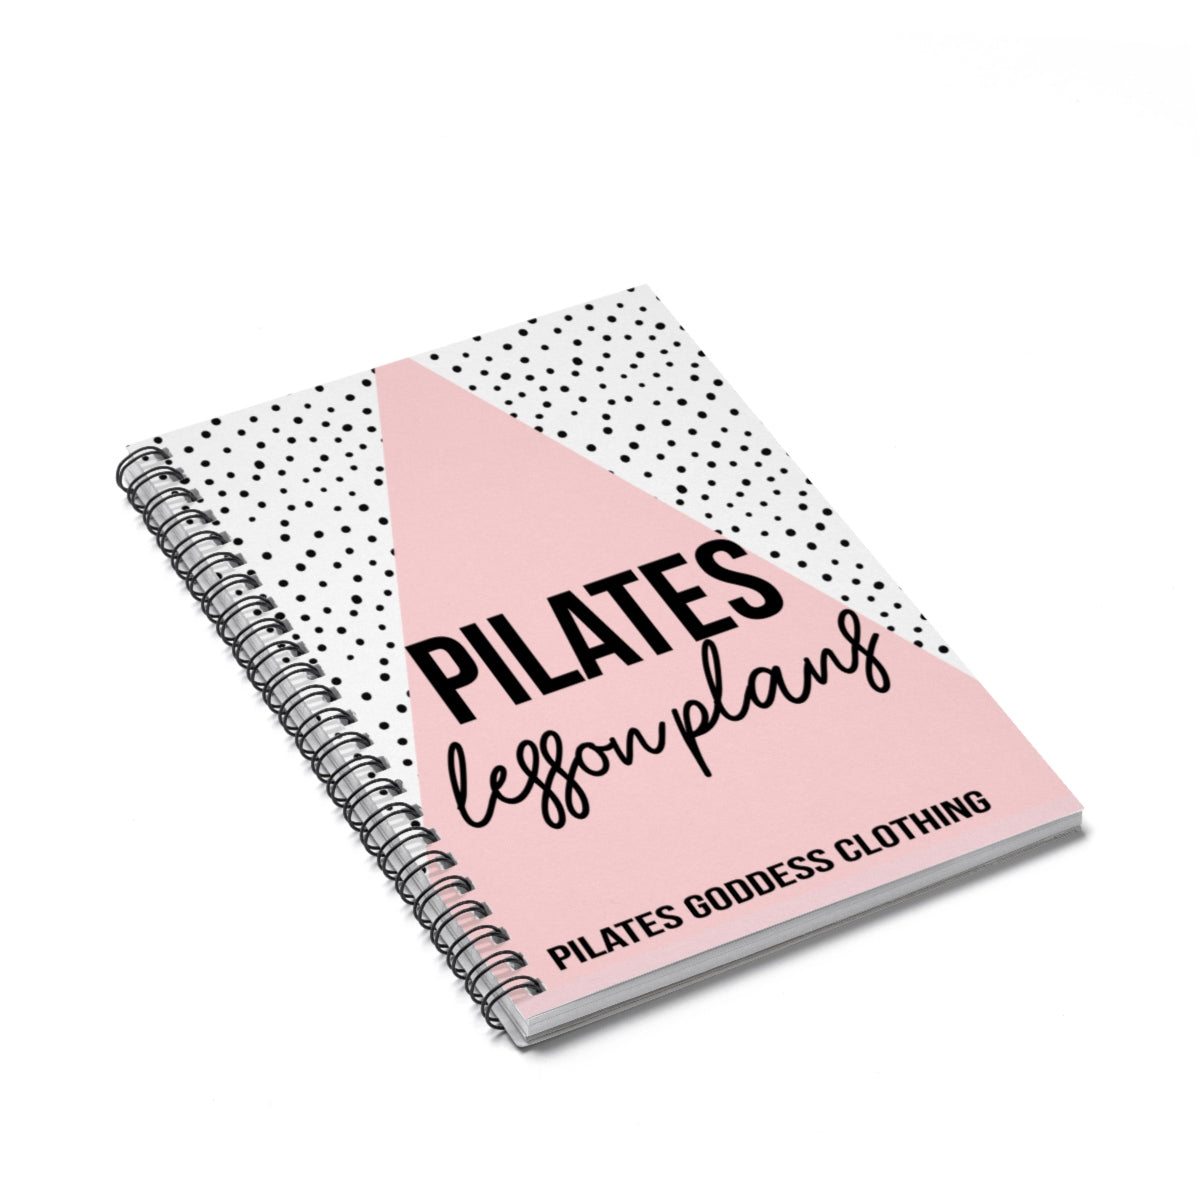 PILATES QUOTE FLEXIBLE SPINE: Lined Journal, Diary, Notebook, 6x9 inches  with 120 Pages.: Publishing, Pilates Practitioniers: 9781650309248:  : Books